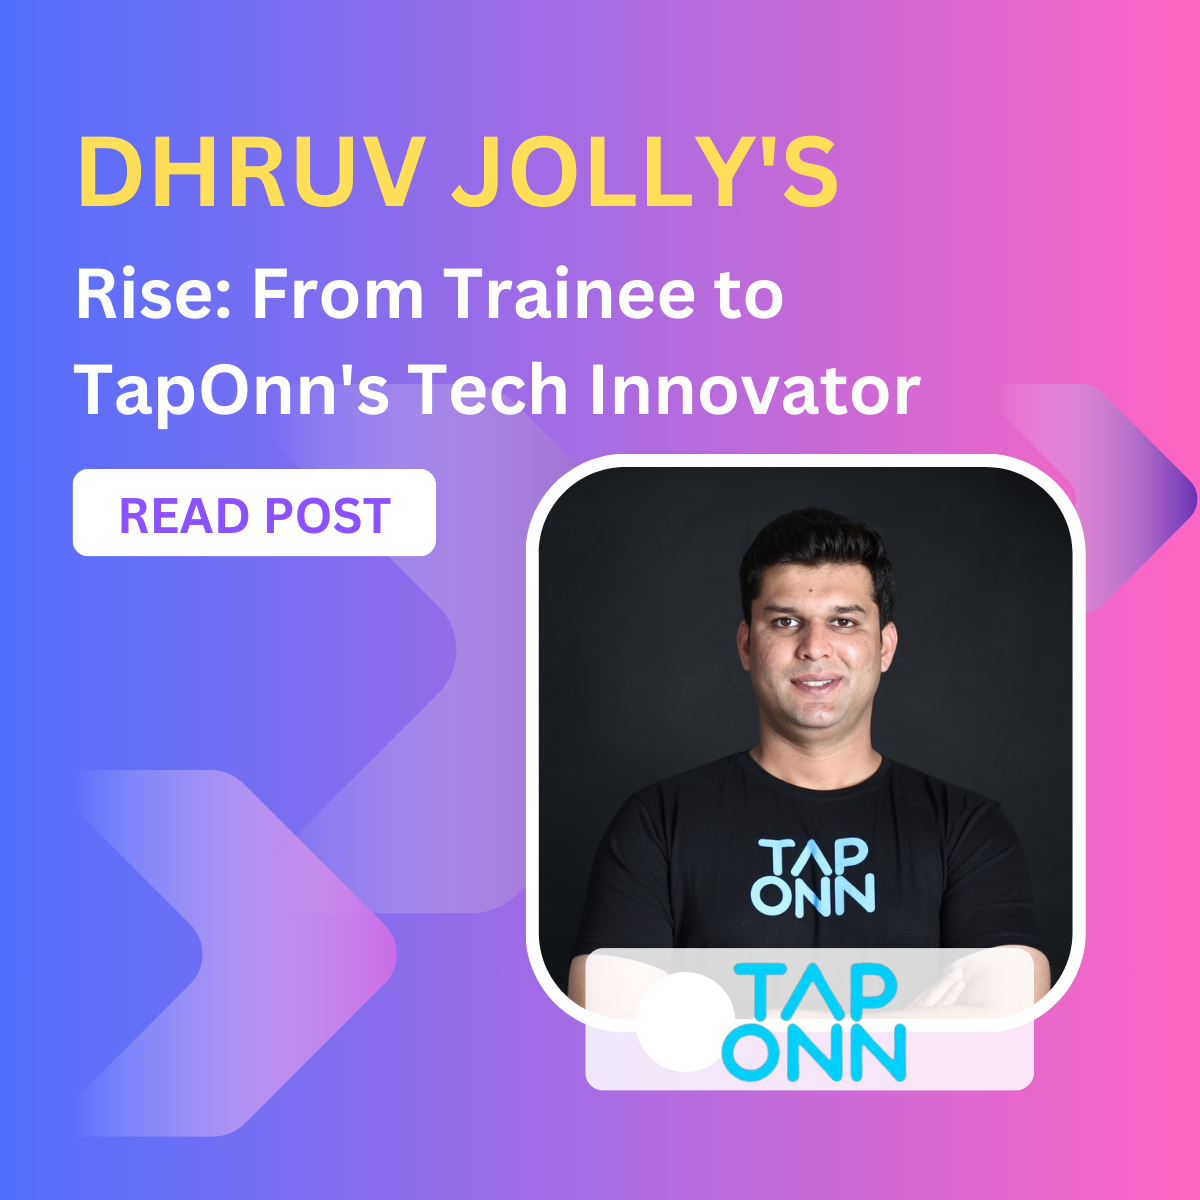 Rise: From Trainee to TapOnn's Tech Innovator